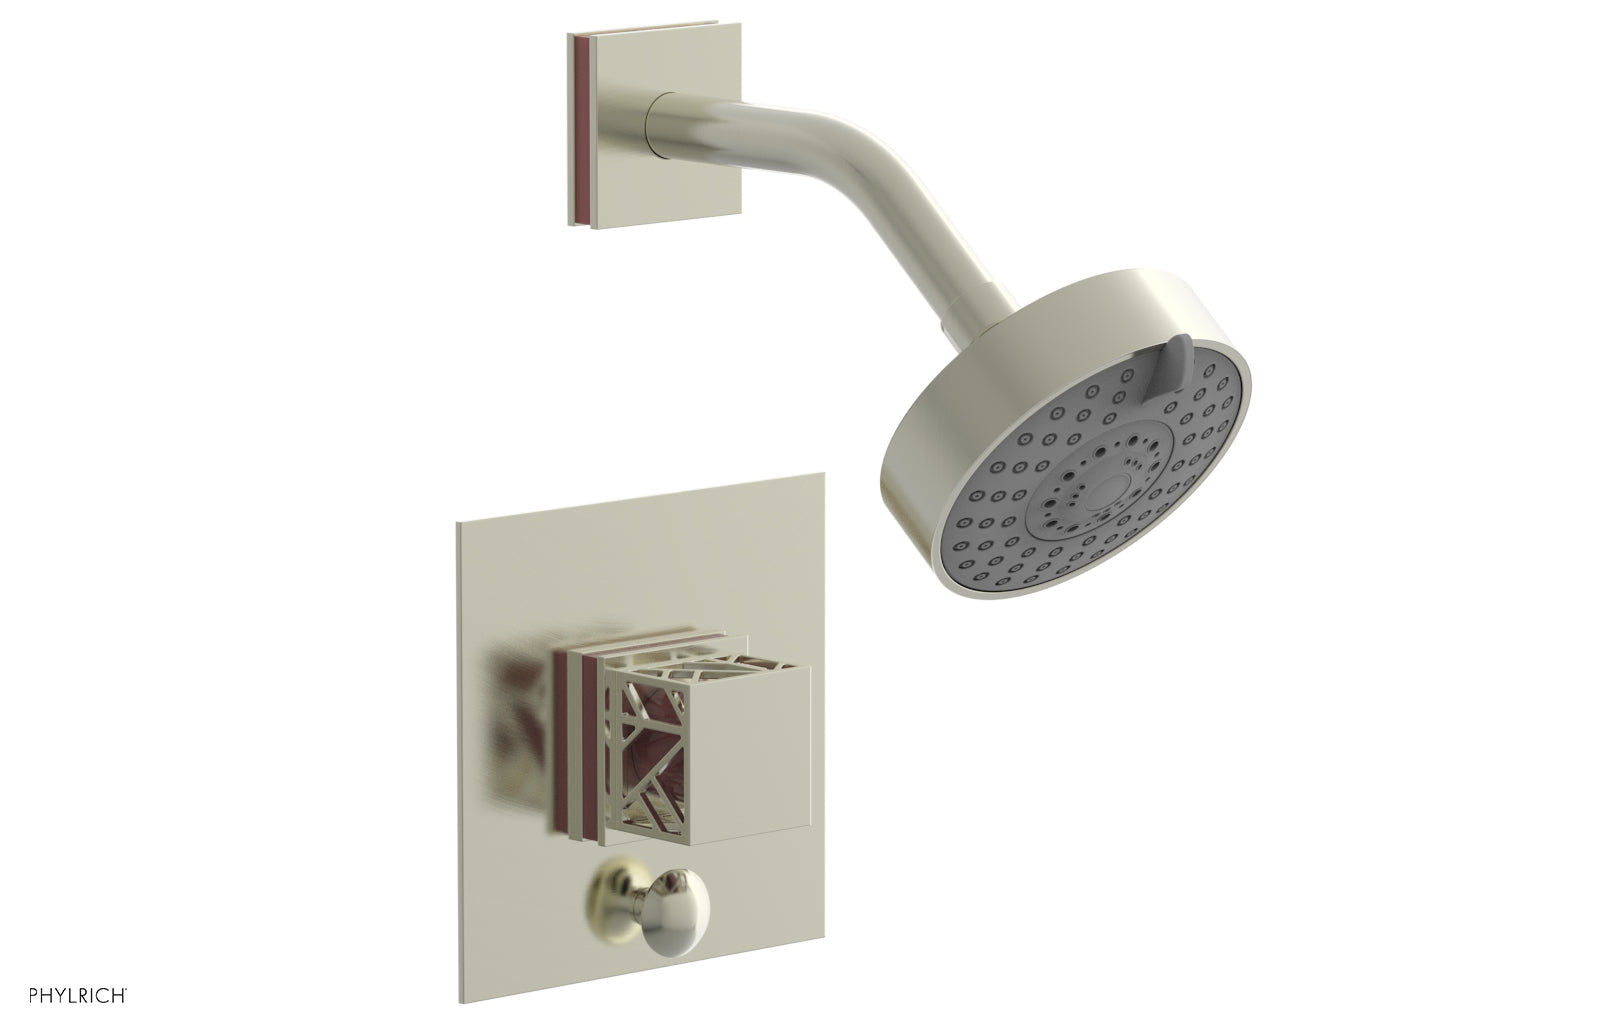 Phylrich JOLIE Pressure Balance Shower and Diverter Set (Less Spout), Square Handle with "Purple" Accents